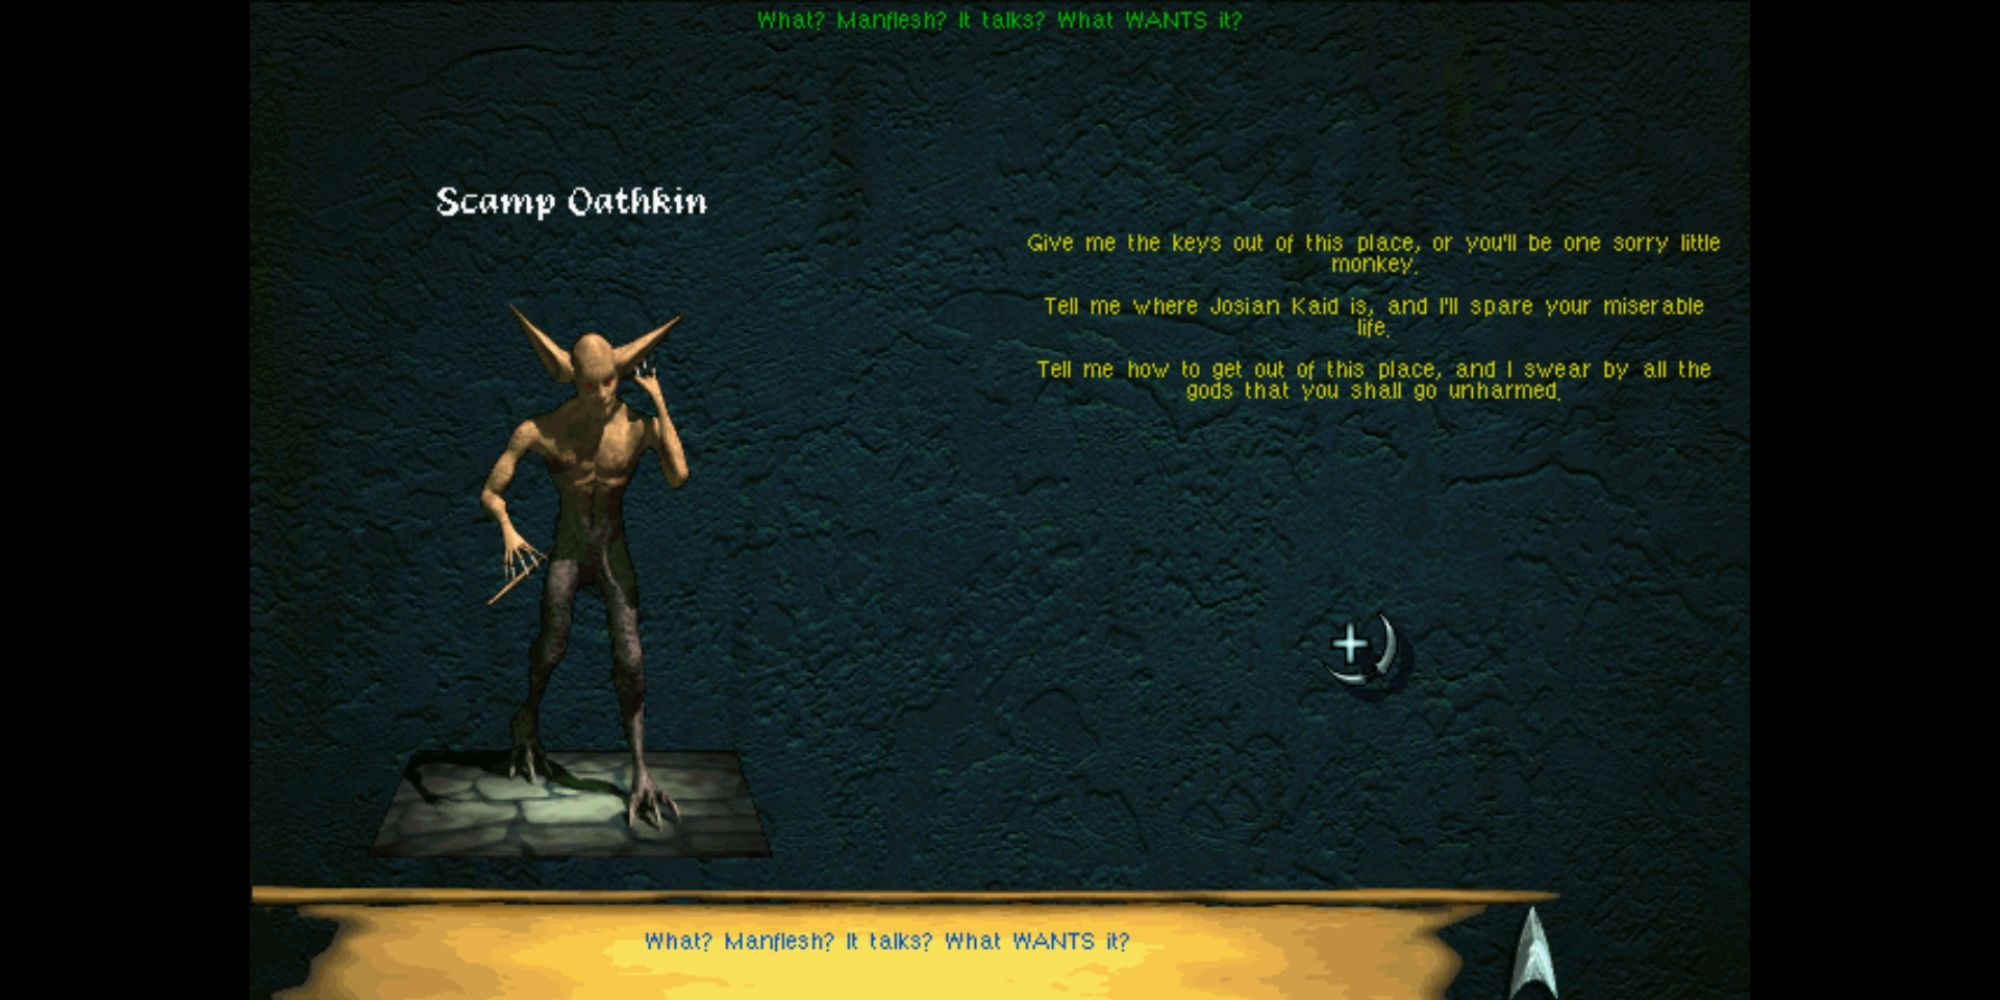 dialogue screen with options for player to respond to a scamp